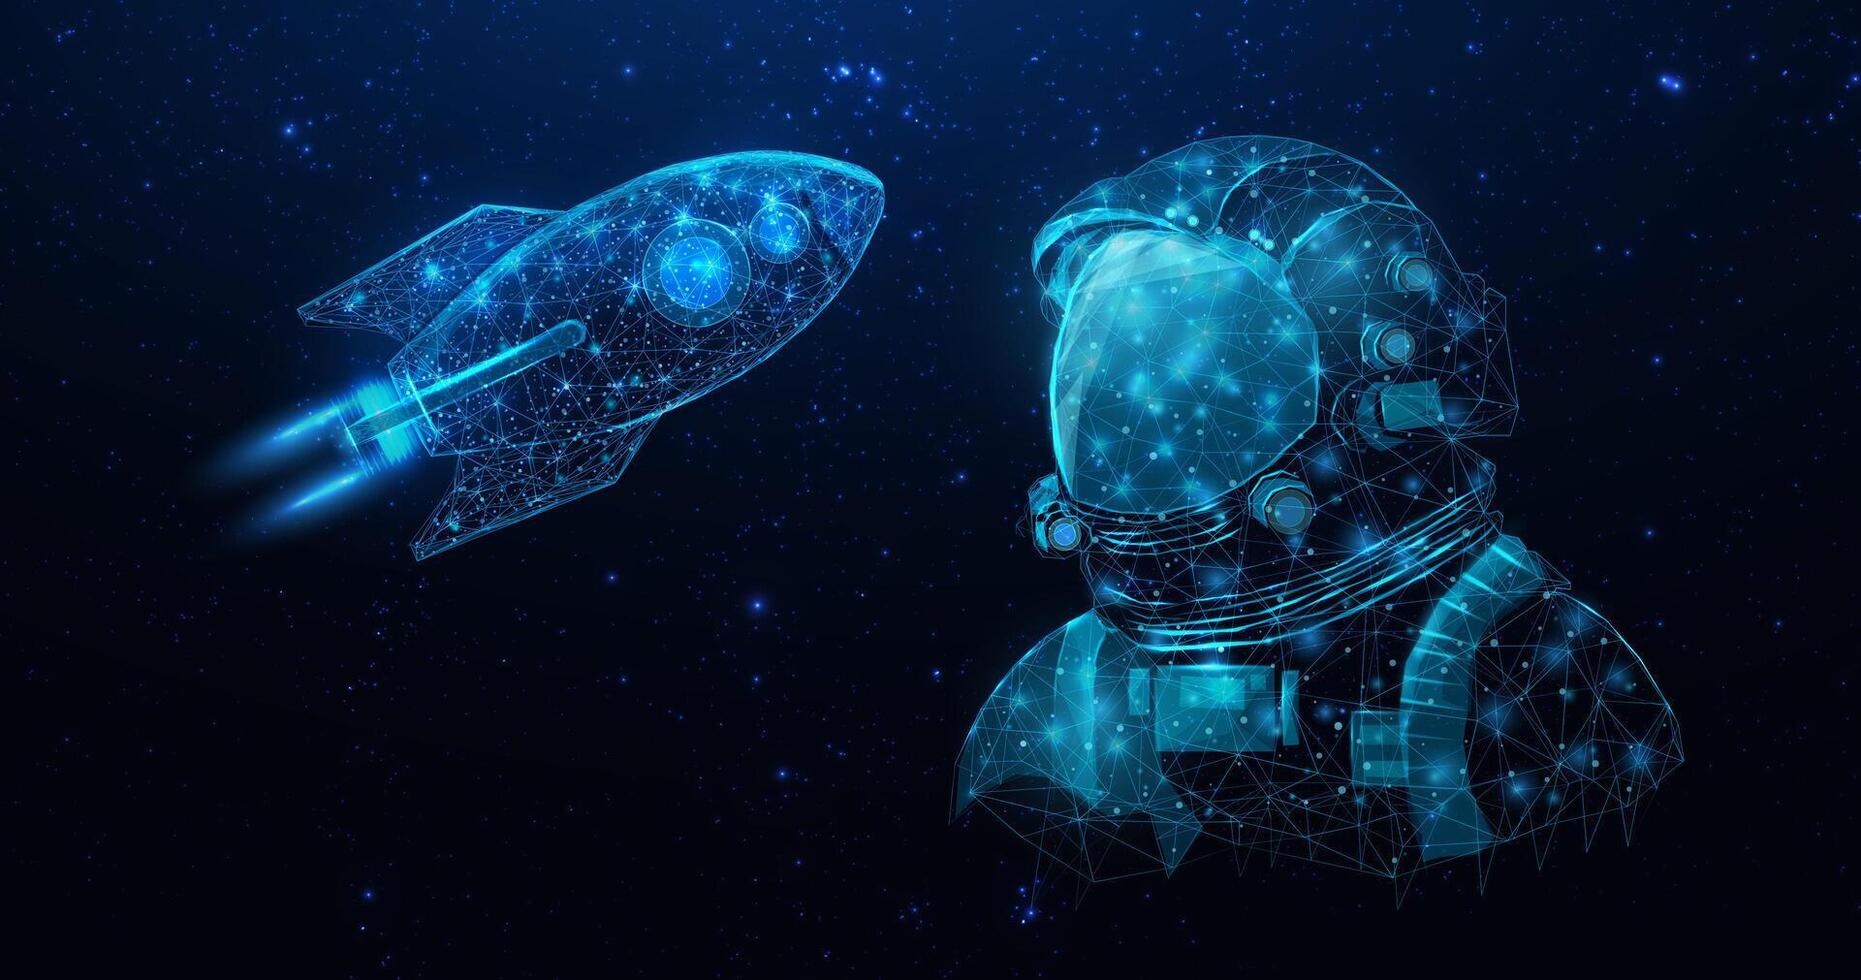 Astronaut in space galaxy with rocket close up. Futuristic polygonal cosmonaut helmet, space concept, wireframe cyber vector illustration. Starry abstract background with glowing human.